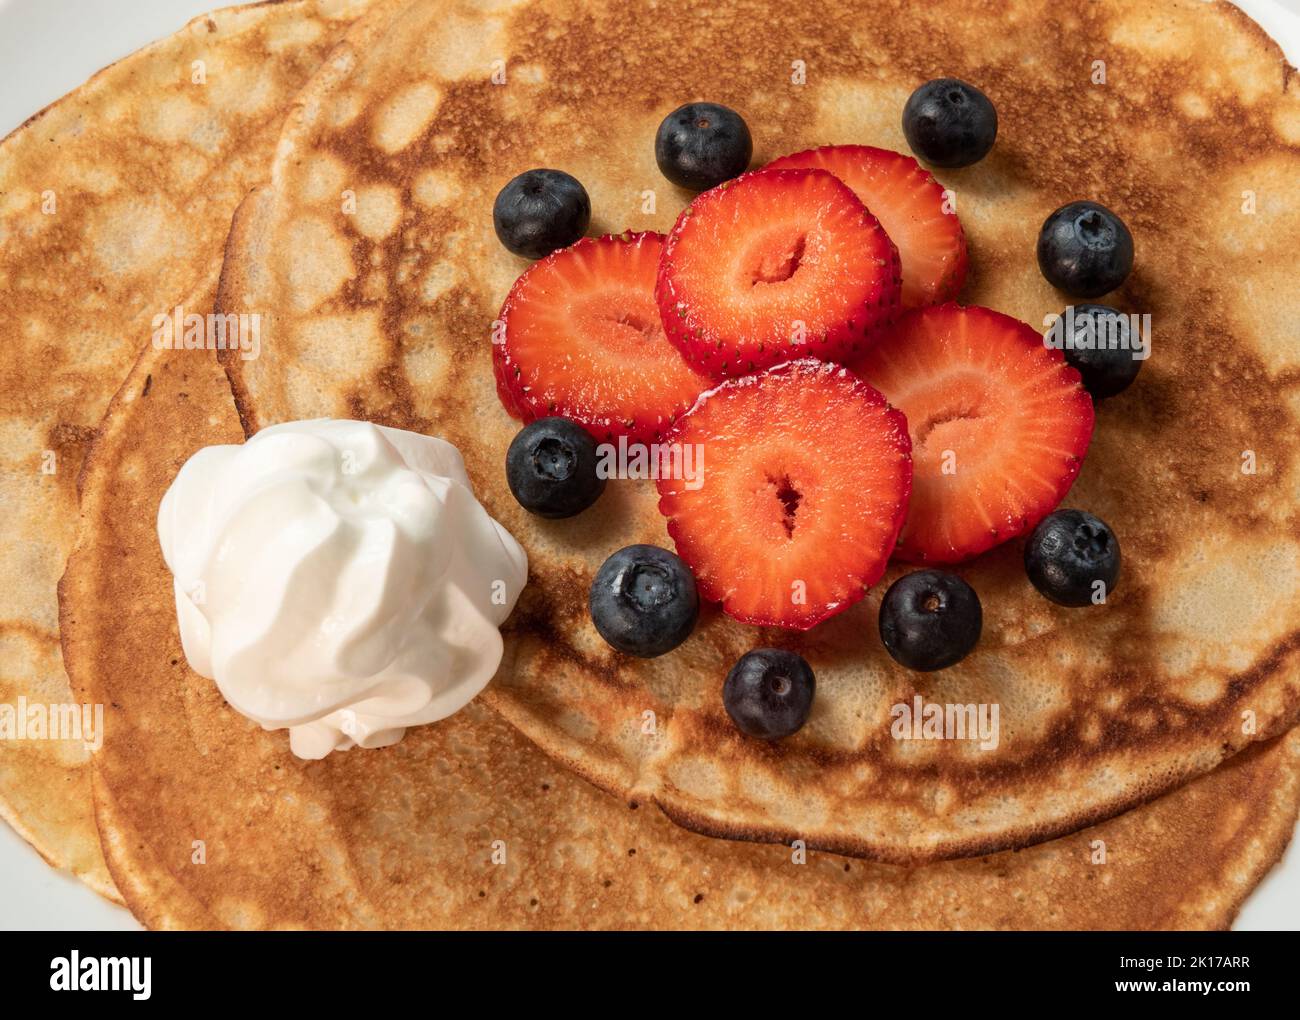 Pancakes with strawberries, blueberries and cream Stock Photo